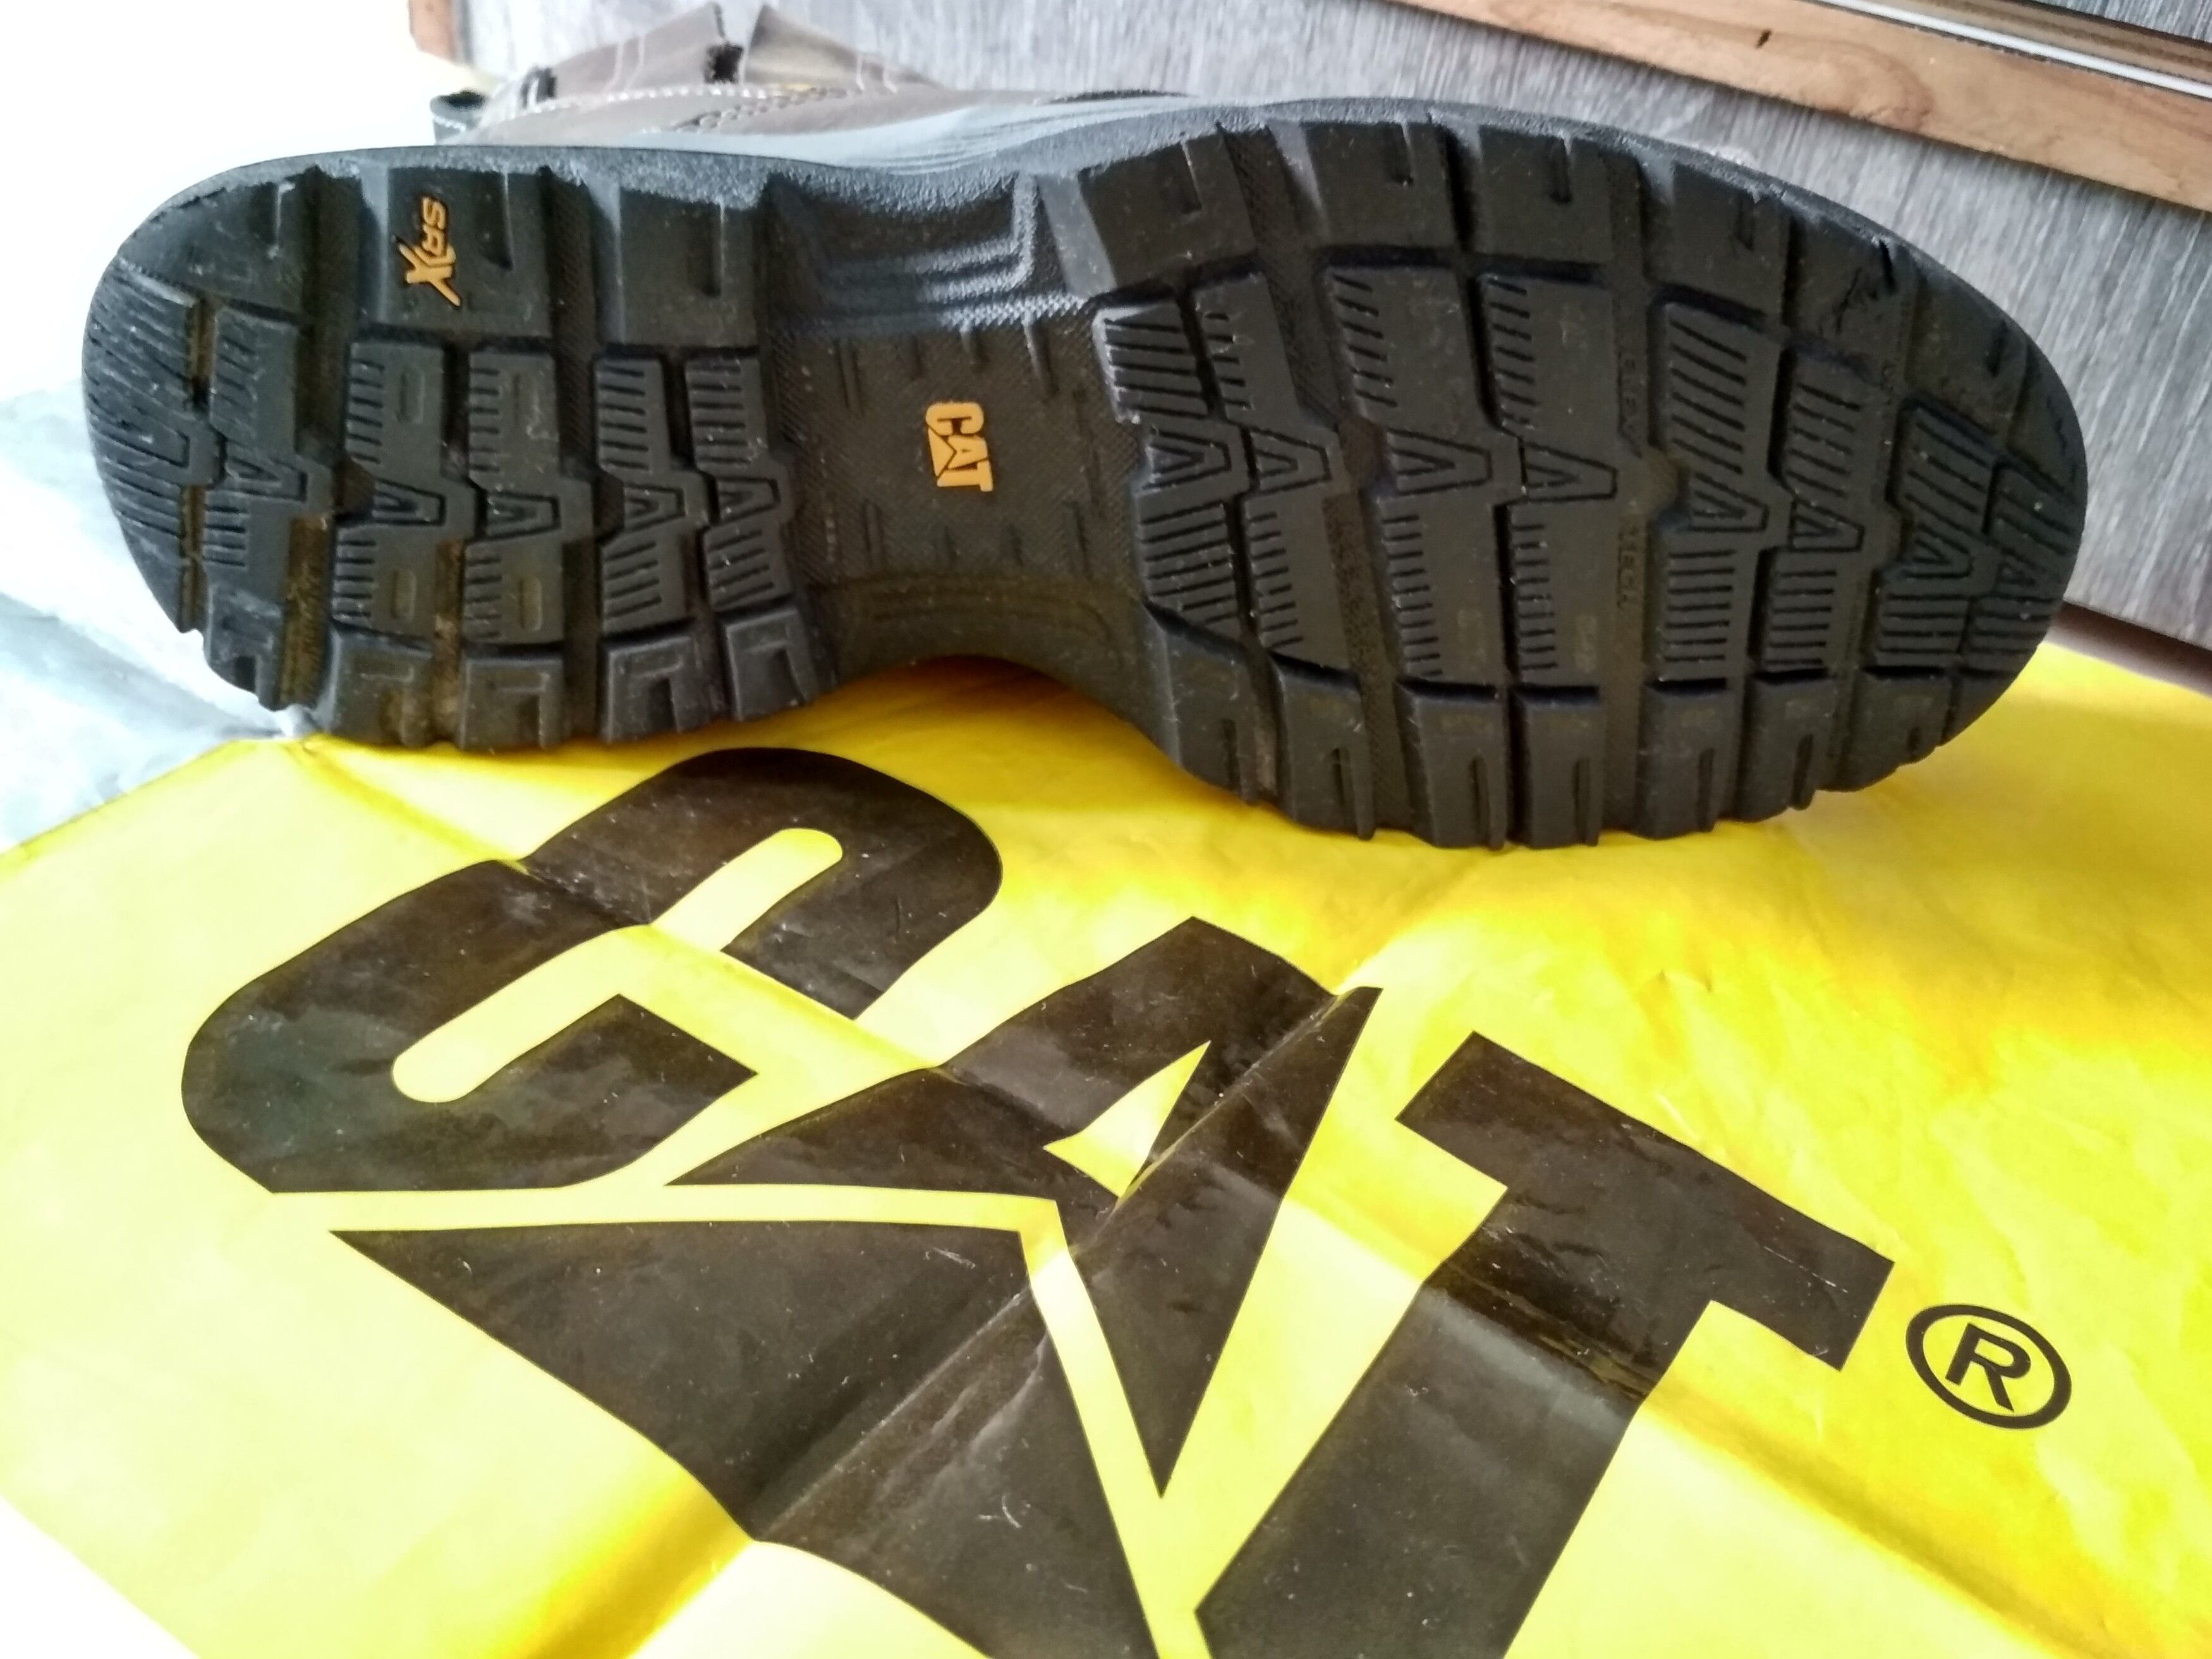 Caterpillar Cat Pull on waterproof Boots for Men's Size US 8 / EU 41 - 5 Thumbnail